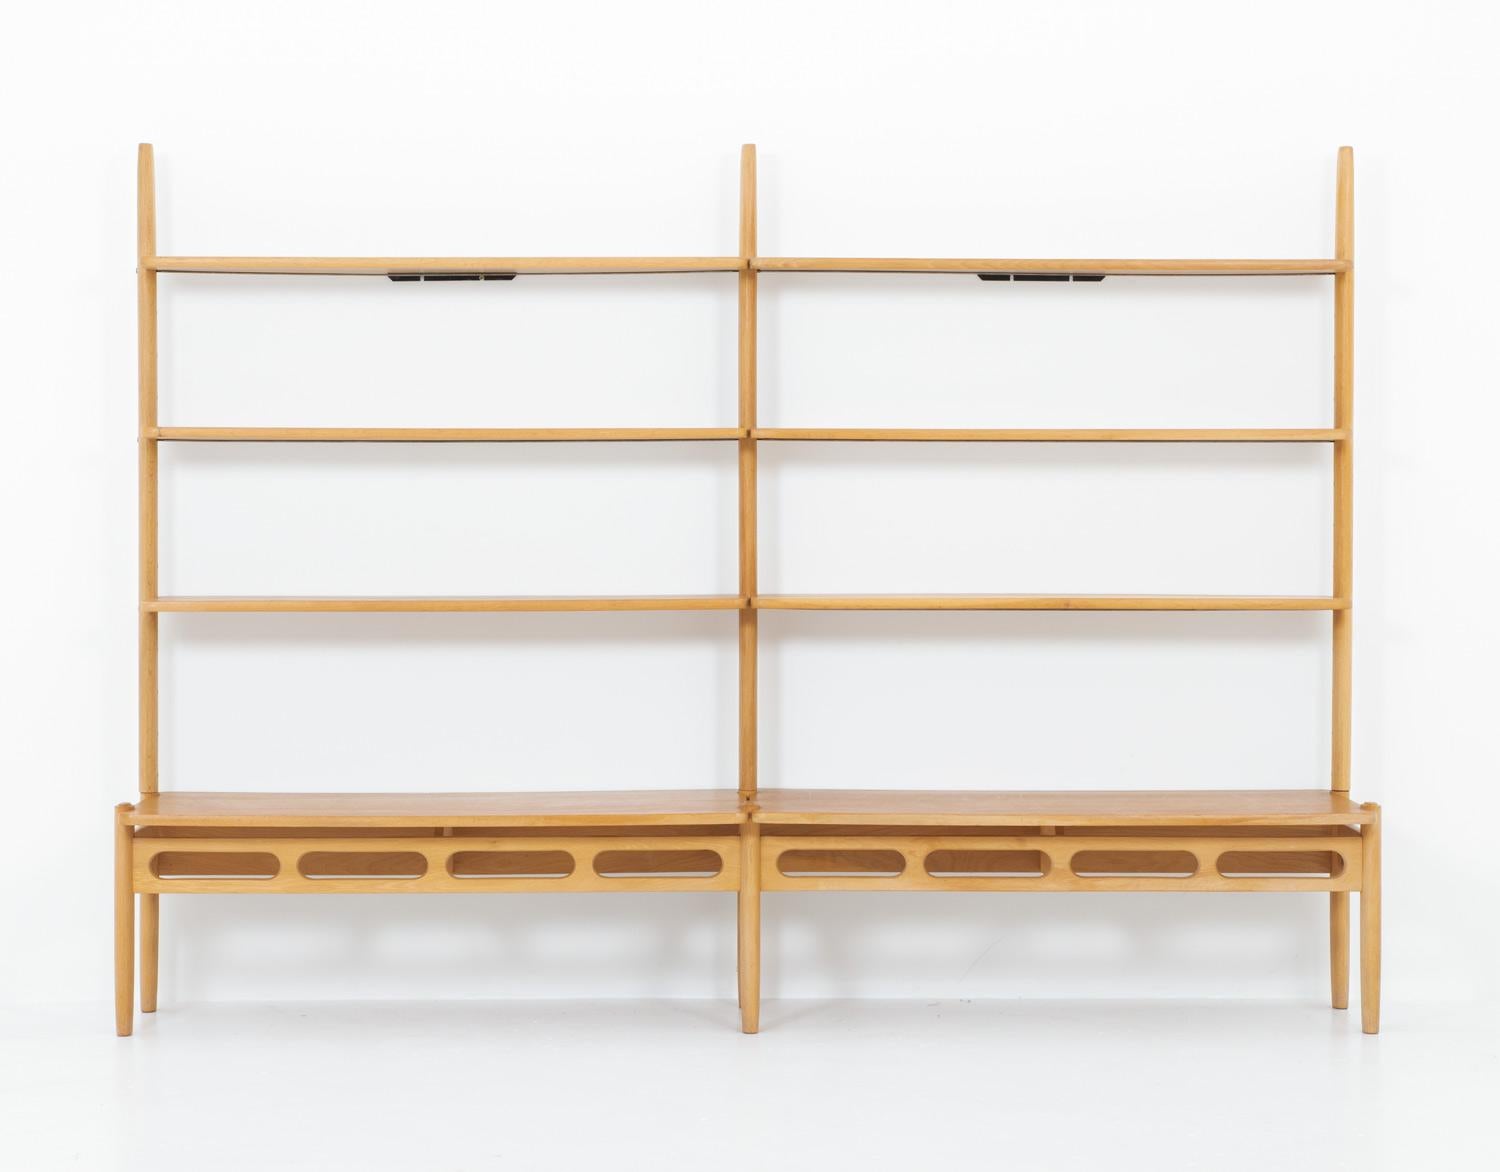 A beautiful shelving unit designed by William Watting for AS Mikael Laursen (Denmark).
This piece is made of solid oak and consists of a free standing bottom shelf and wall-mounted top shelves, resting on the bottom shelf's rear legs.

Condition: